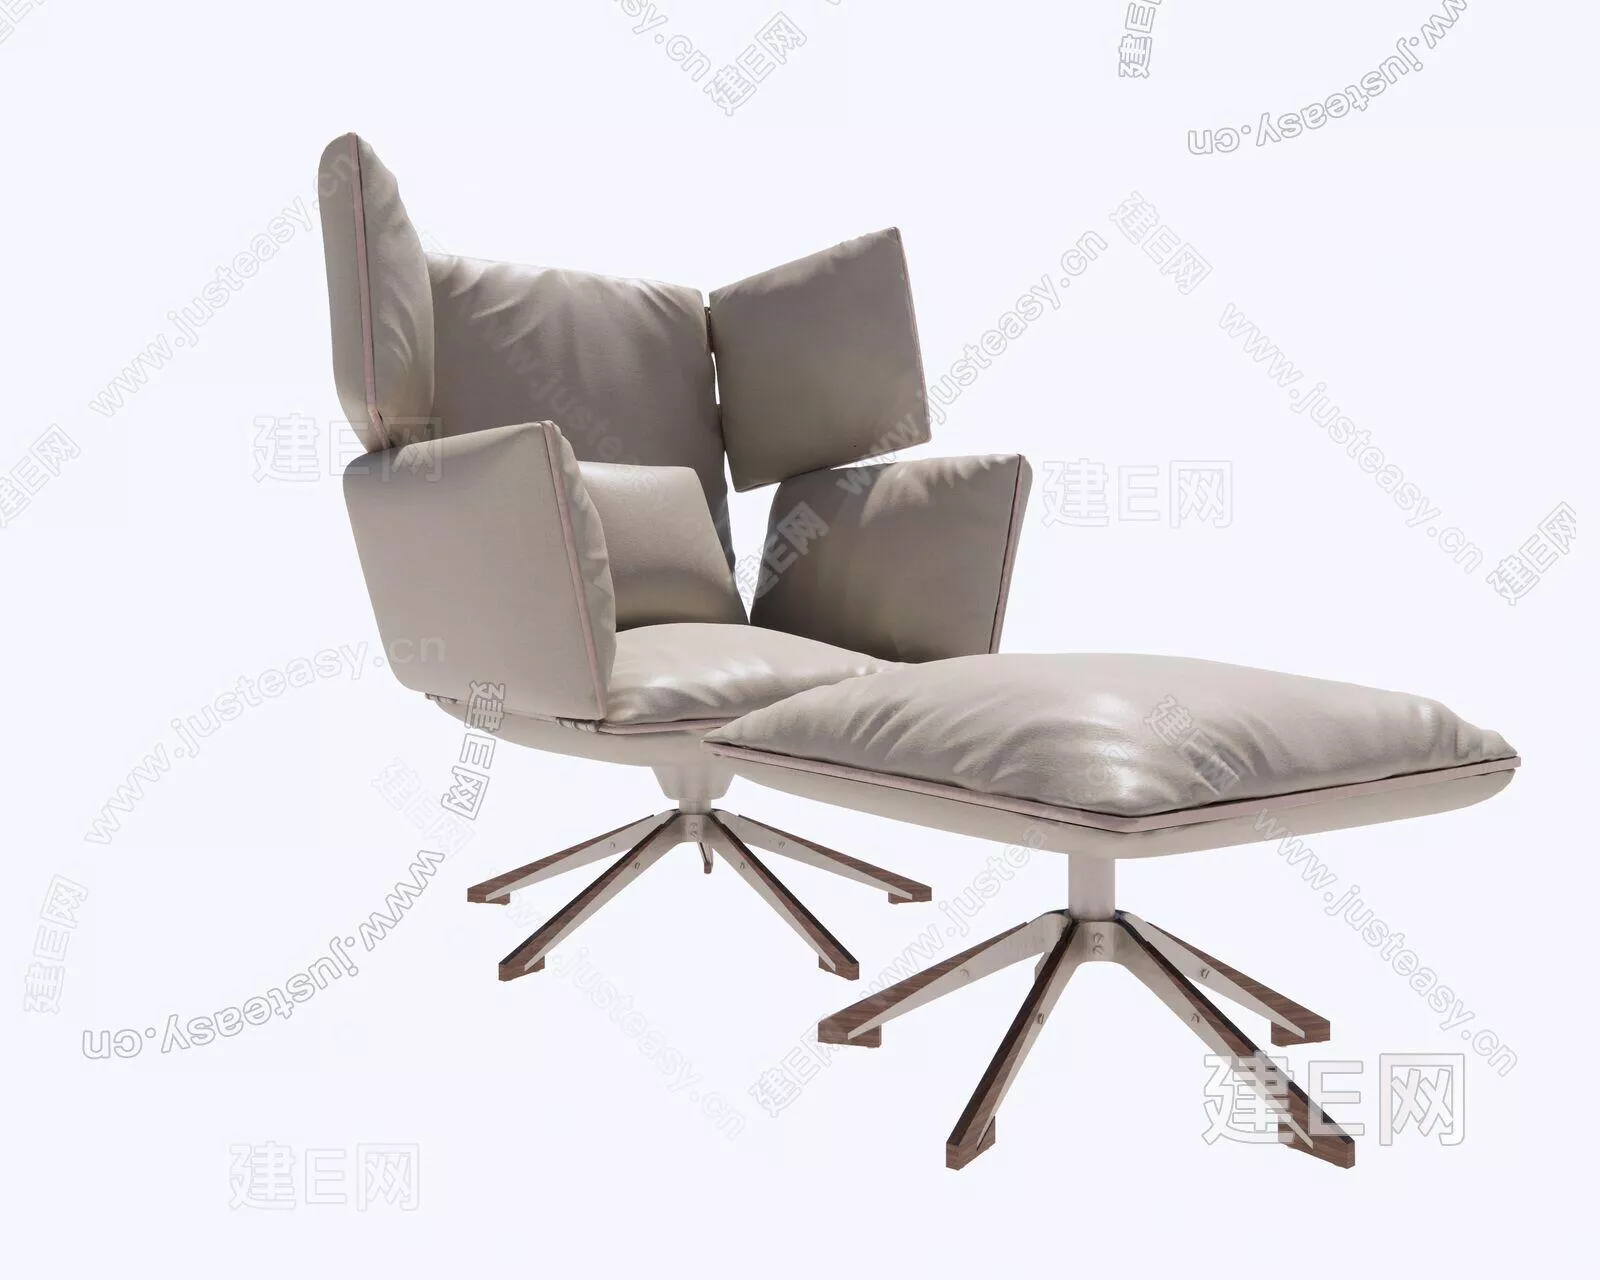 EUROPE LOUNGLE CHAIR - SKETCHUP 3D MODEL - ENSCAPE - 109594081